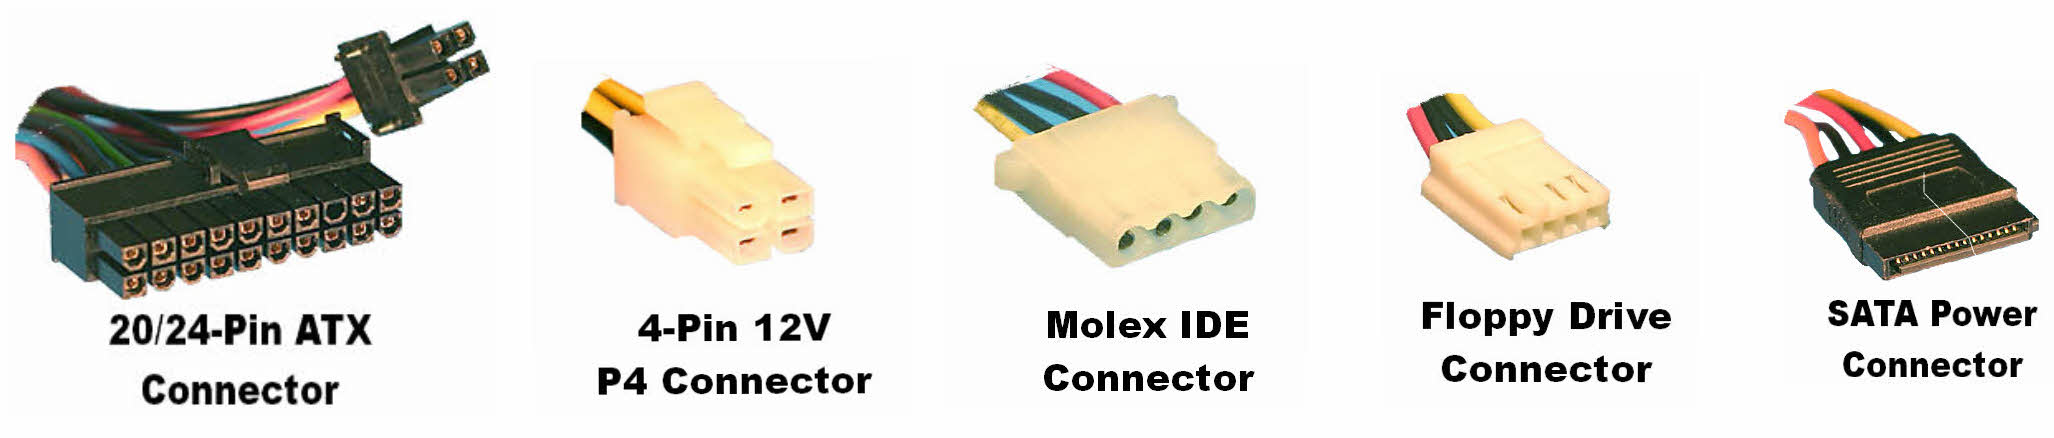 Power Supply Connector Types